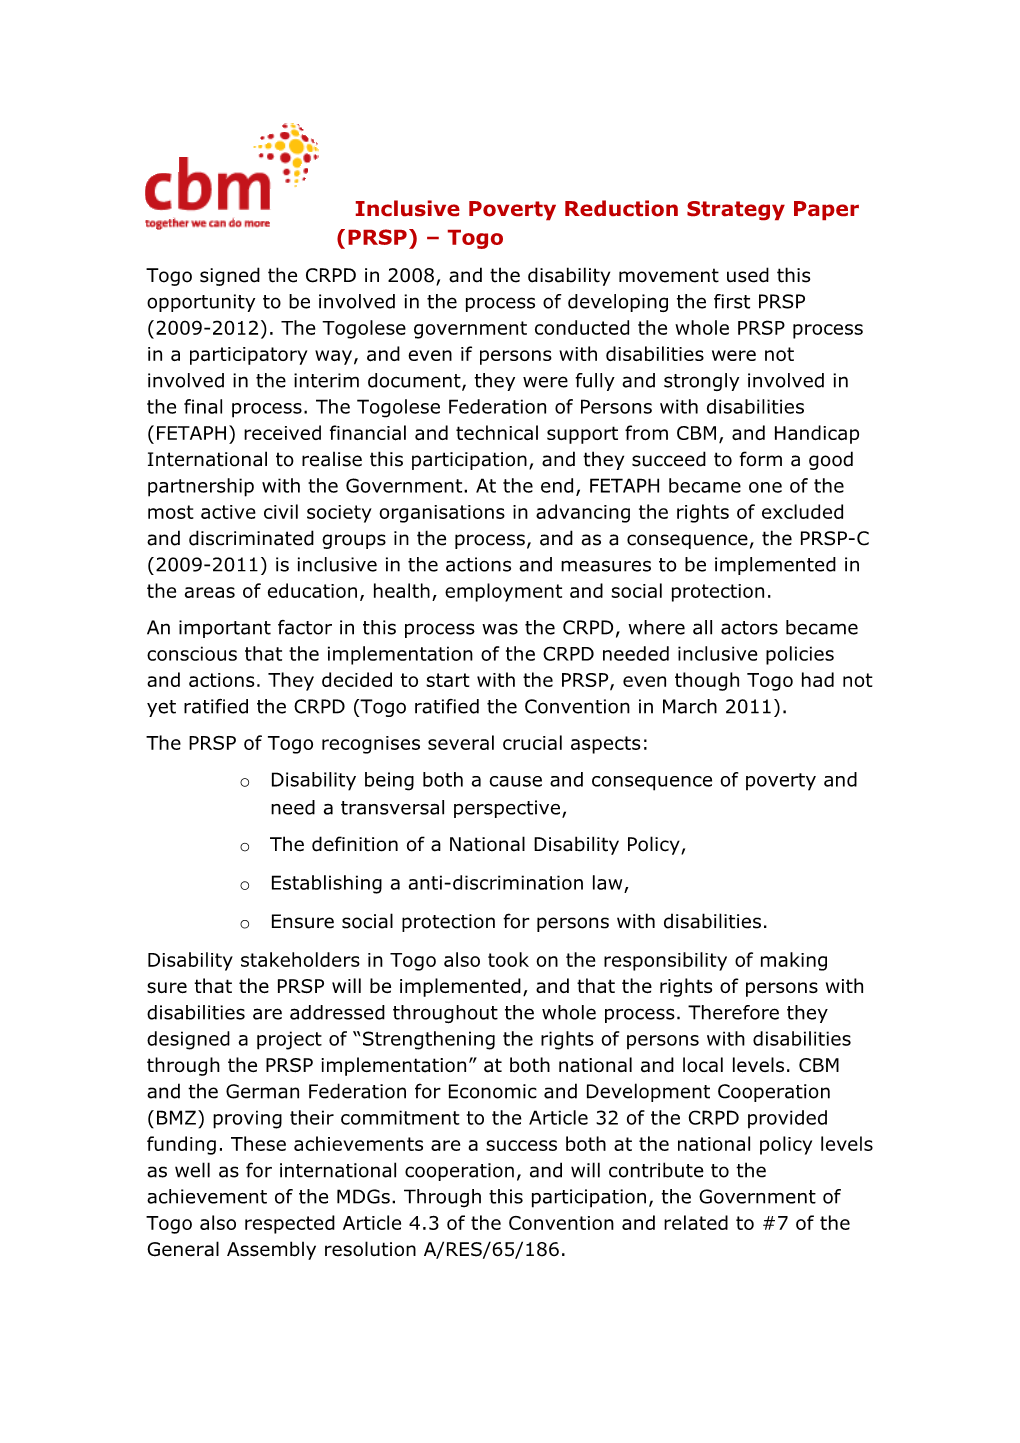 Inclusive Poverty Reduction Strategy Paper (PRSP) Togo